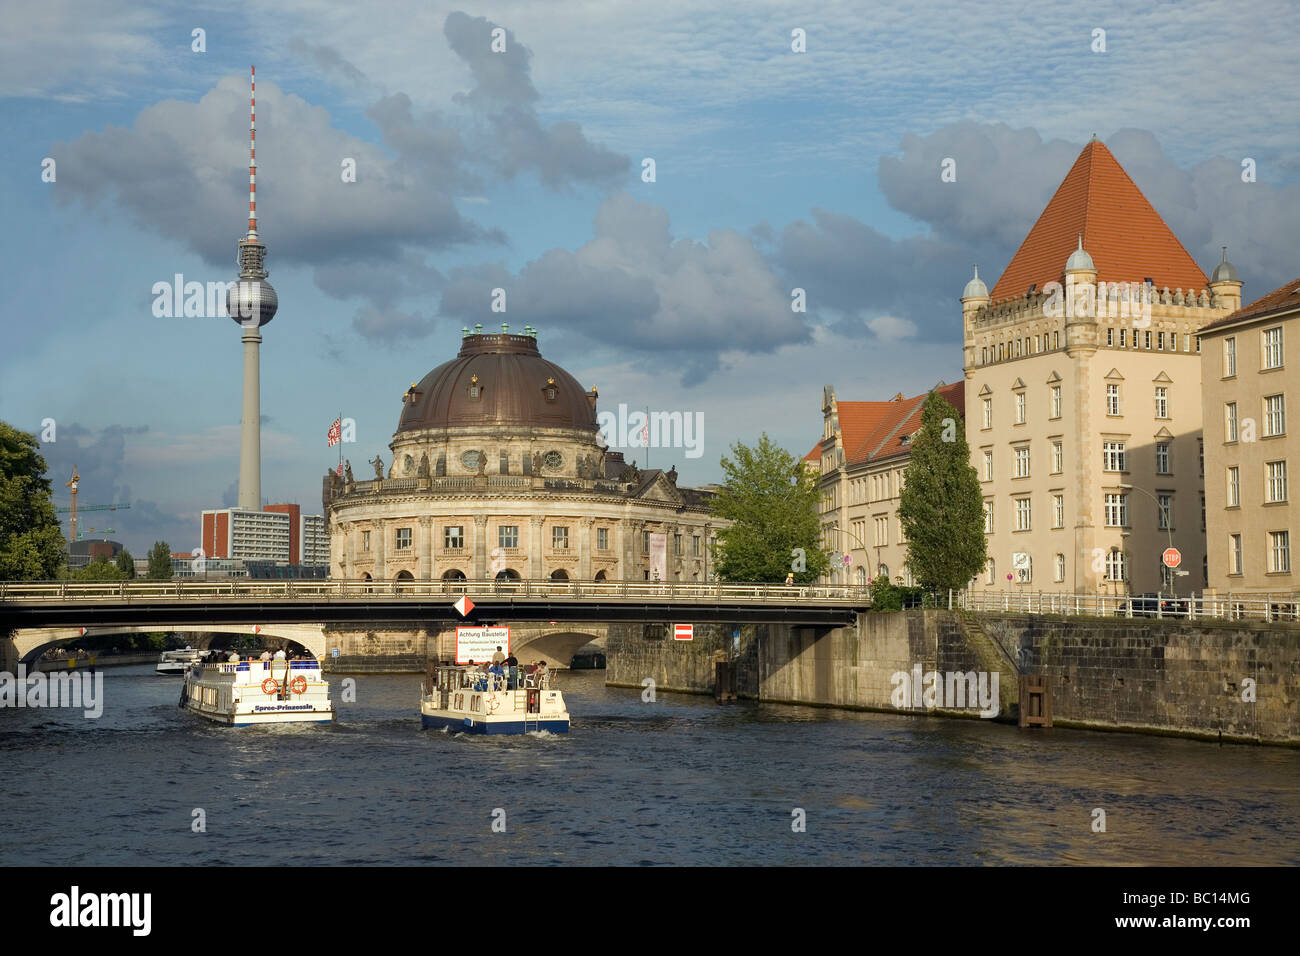 River Spree with Bode Museum, Fernsehturm and tourist boats, Berlin, Germany Stock Photo